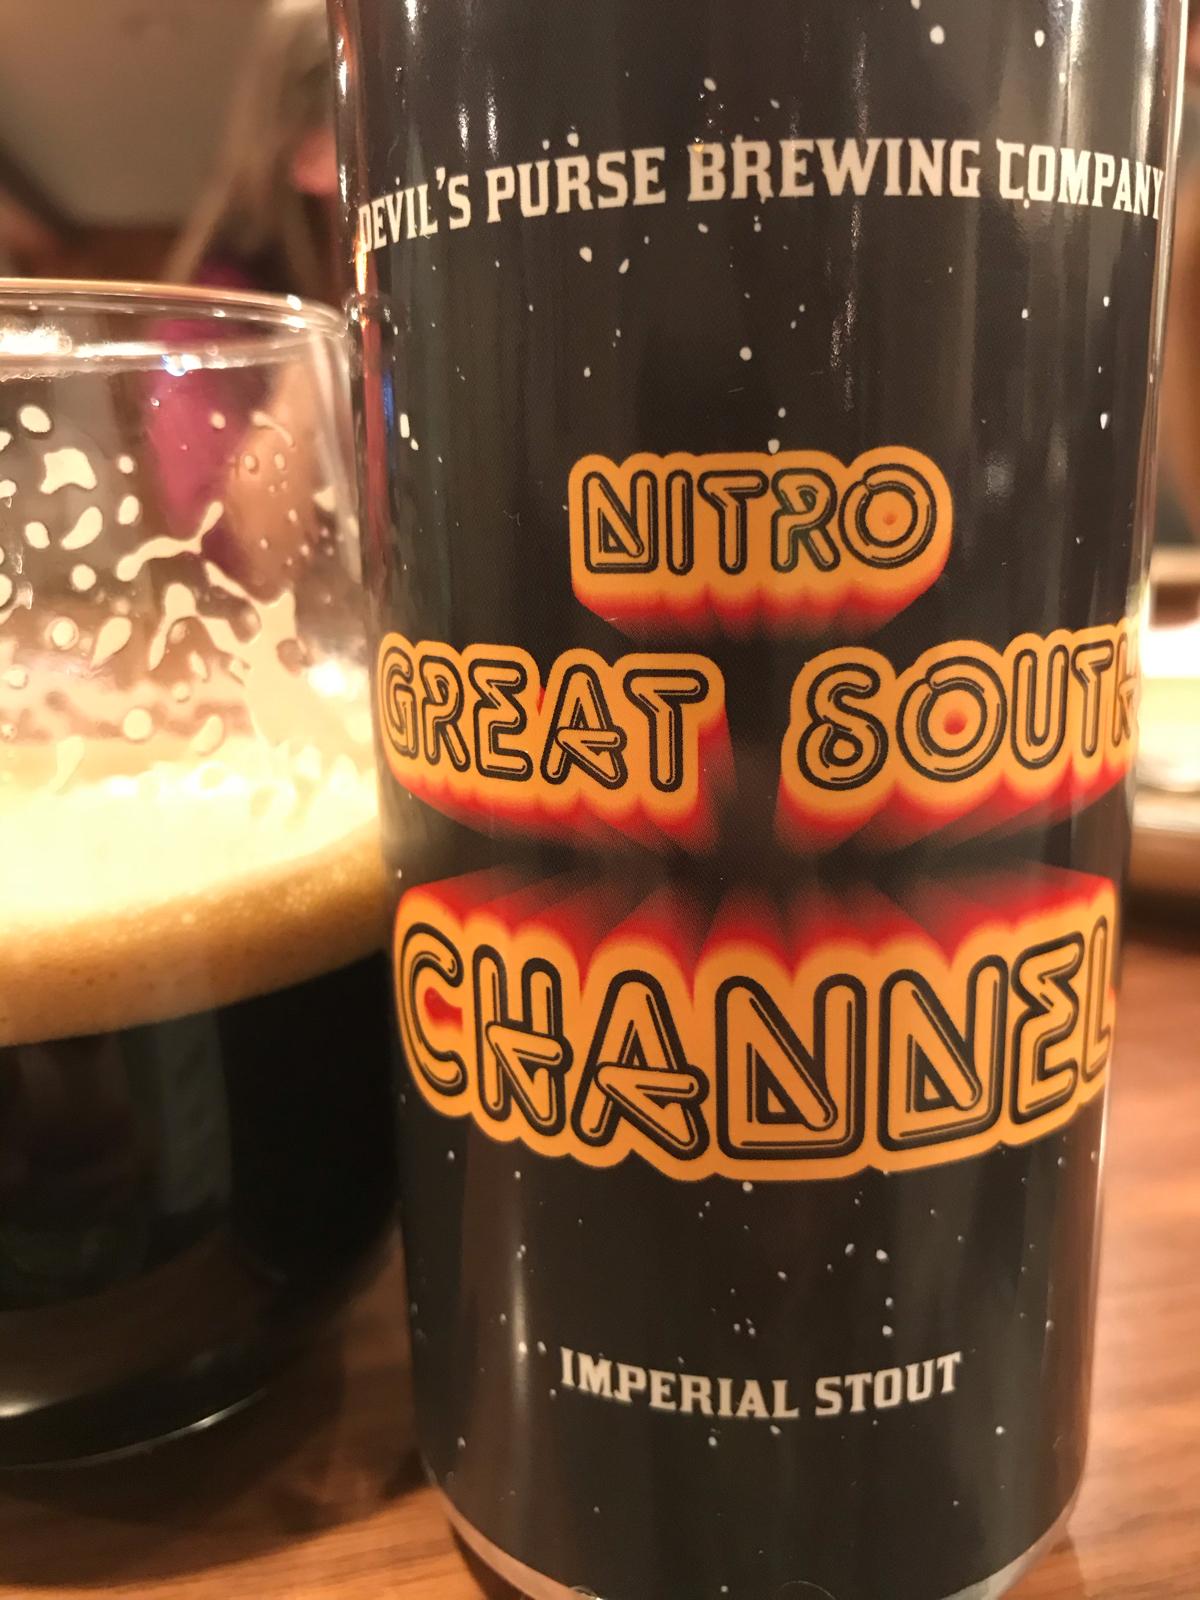 Great South Channel (Nitro)